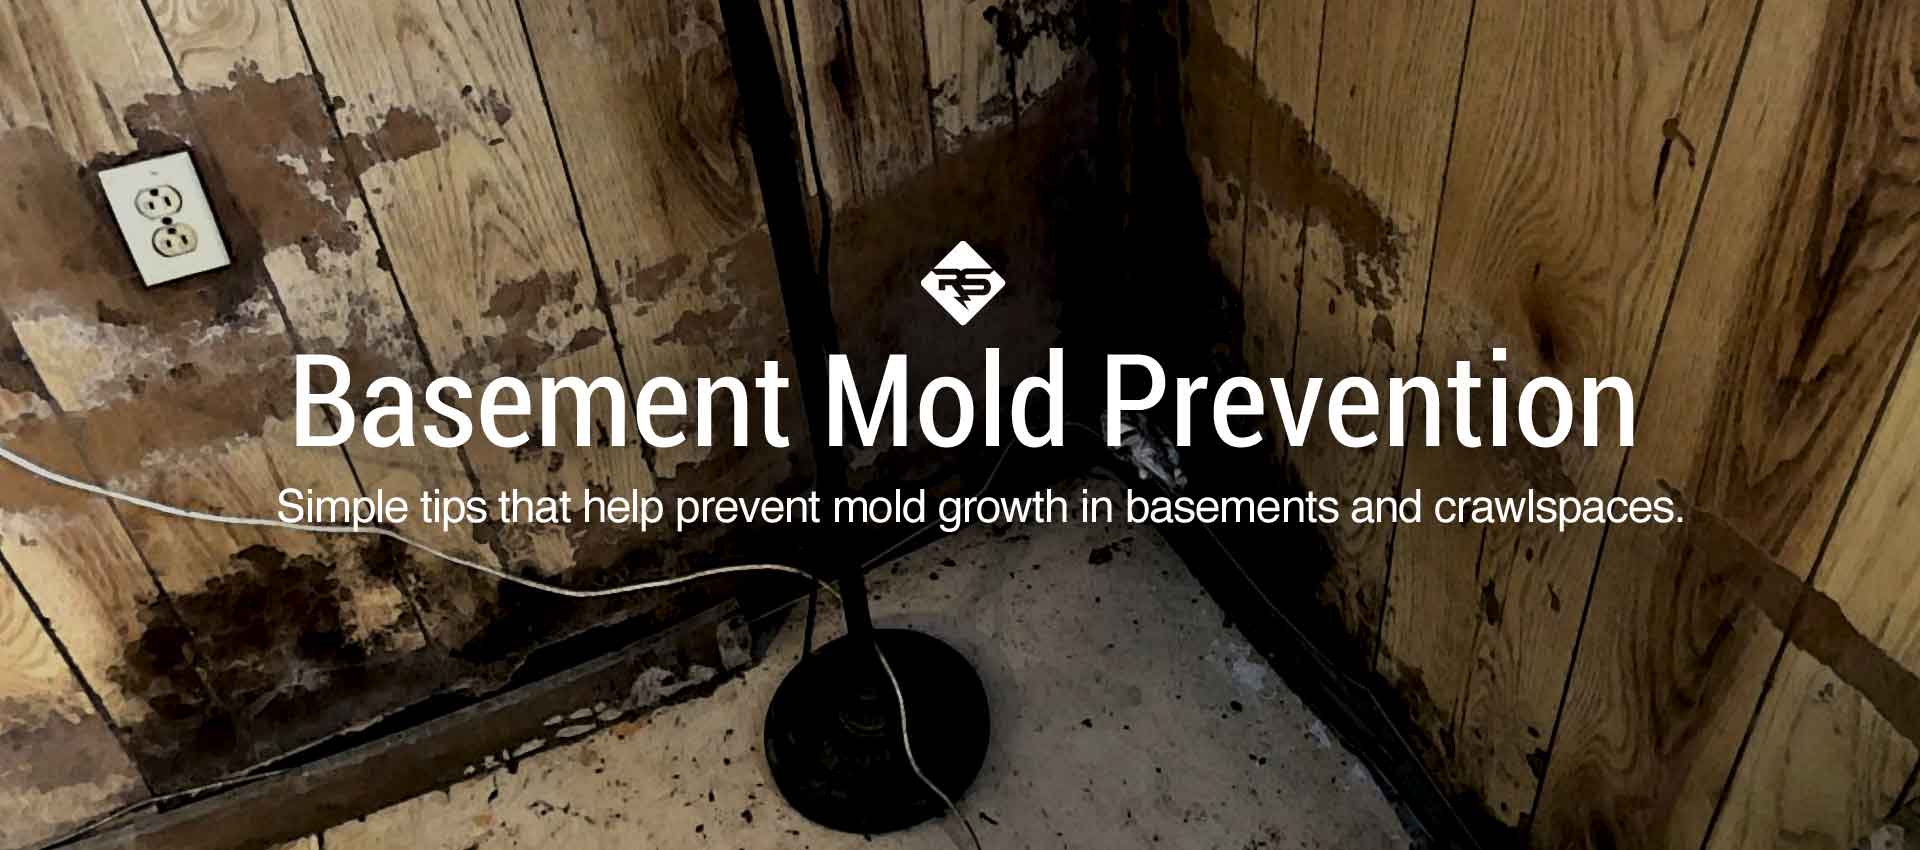 Simple Steps to Prevent Mold in Basement